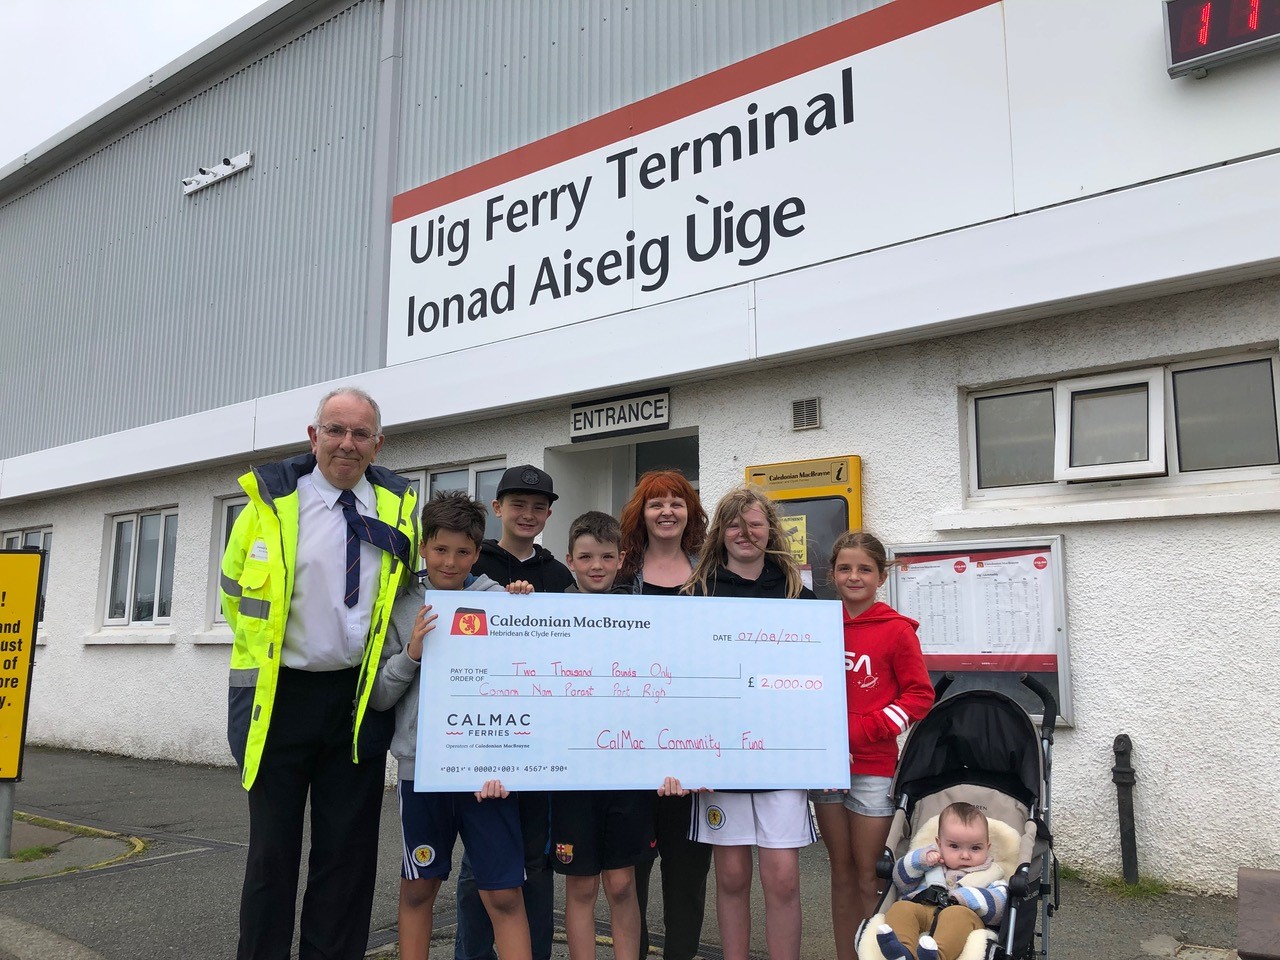 Uig Port Manager, Donald Beaton presents Comann nam Pàrant Port Rìgh with their £2000 cheque.